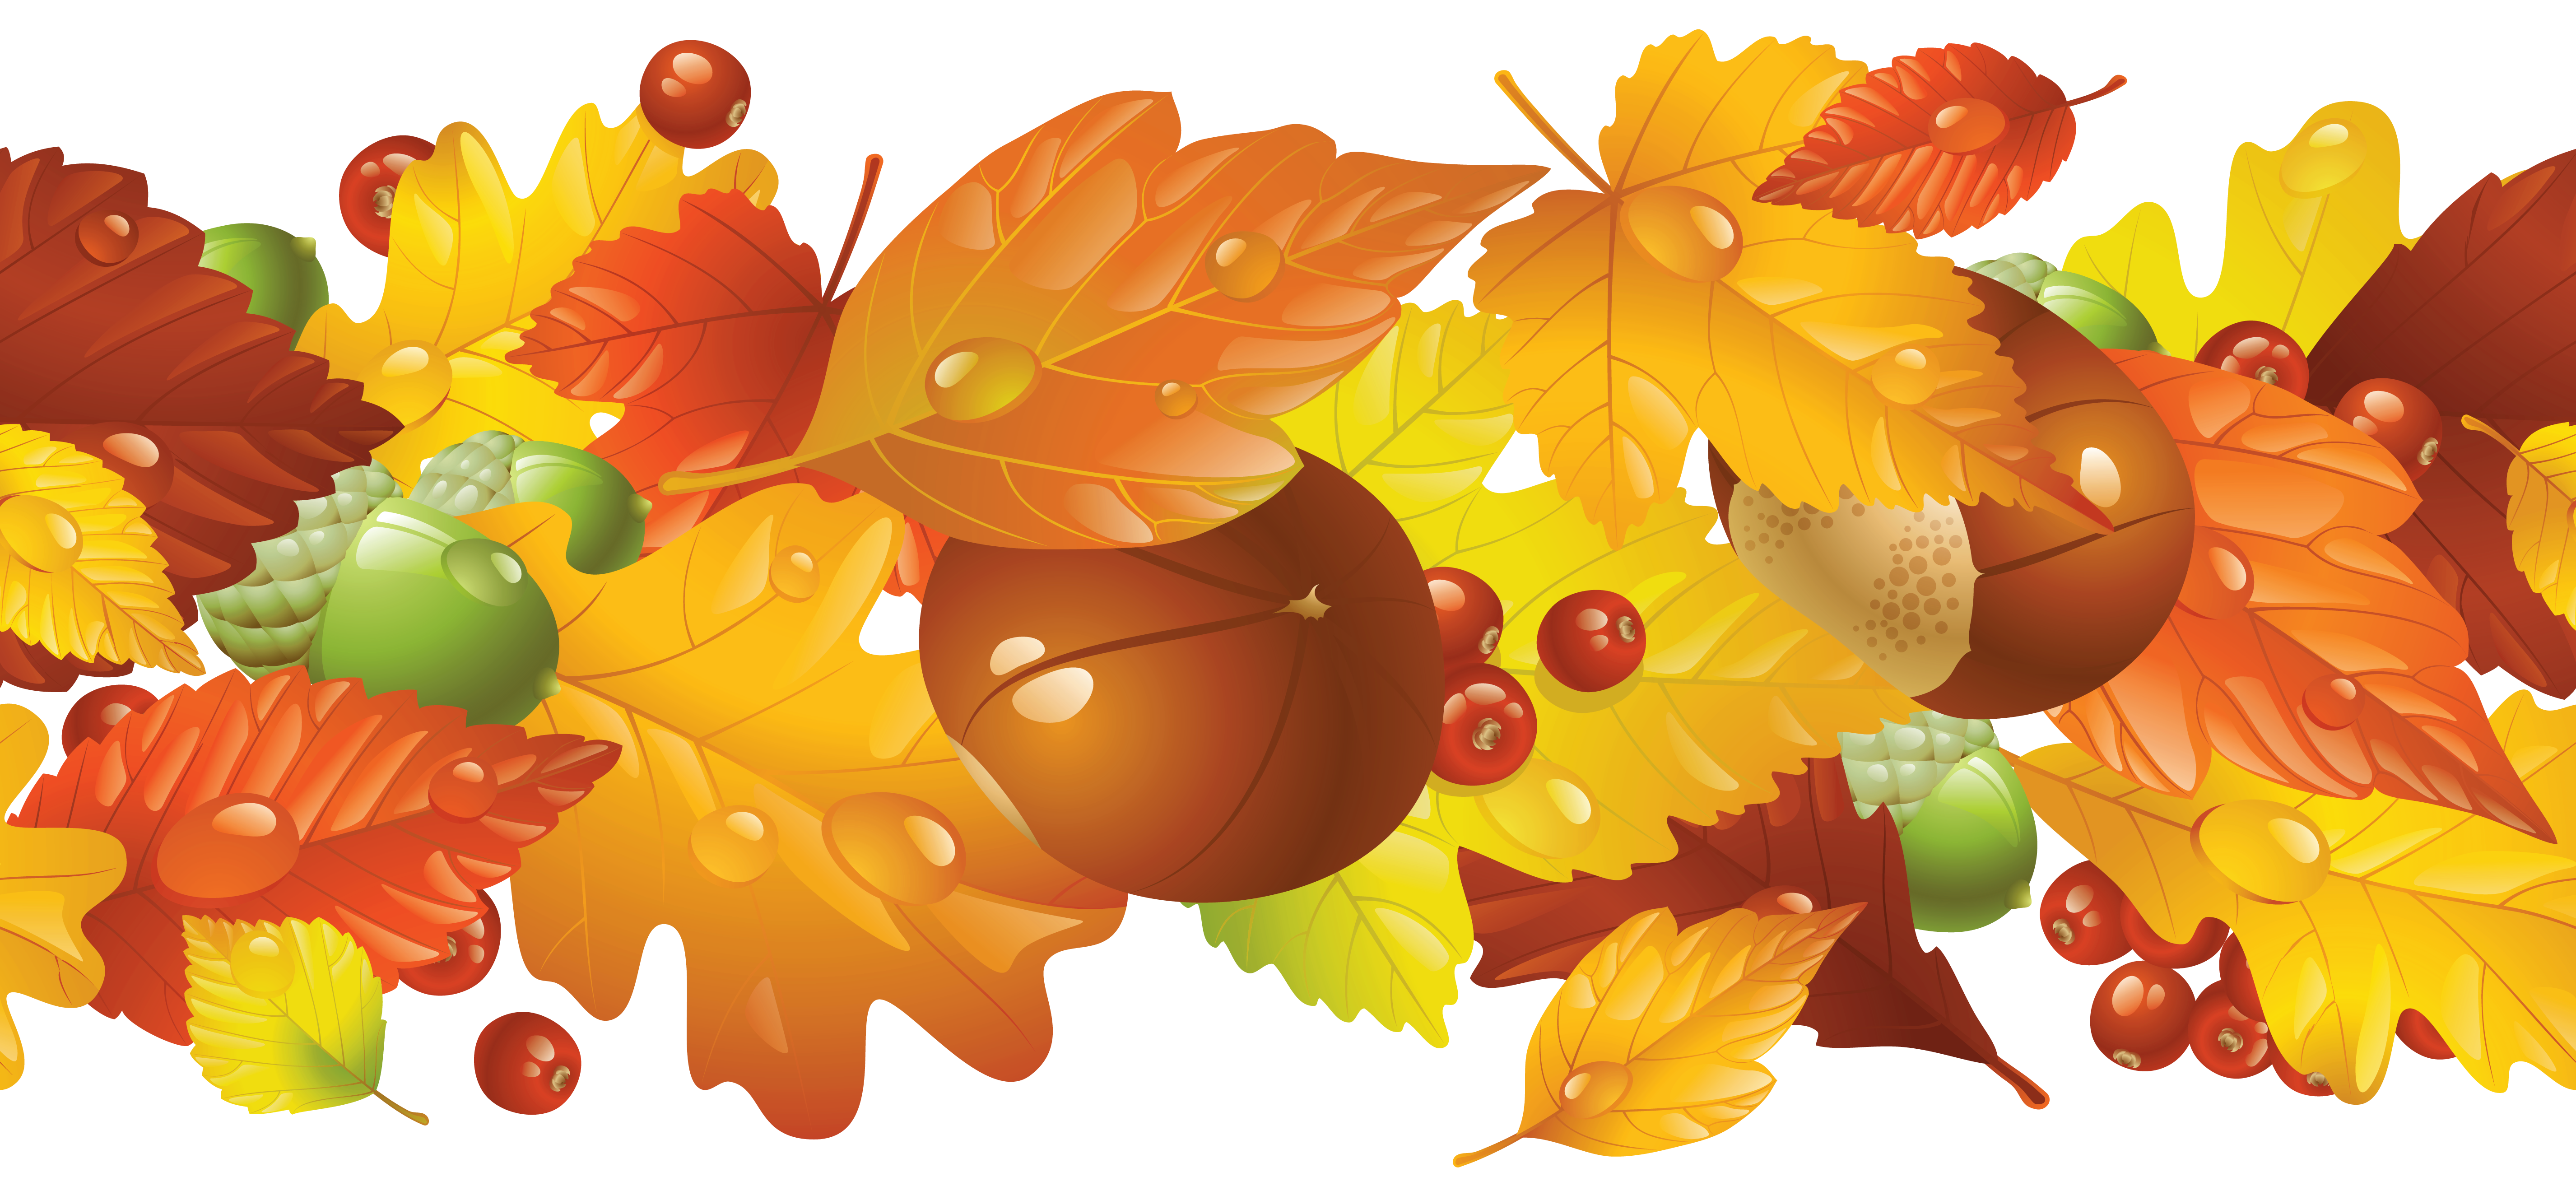 Fall clipart wallpaper, Fall wallpapers Transparent FREE for download on WebStockReview 2020